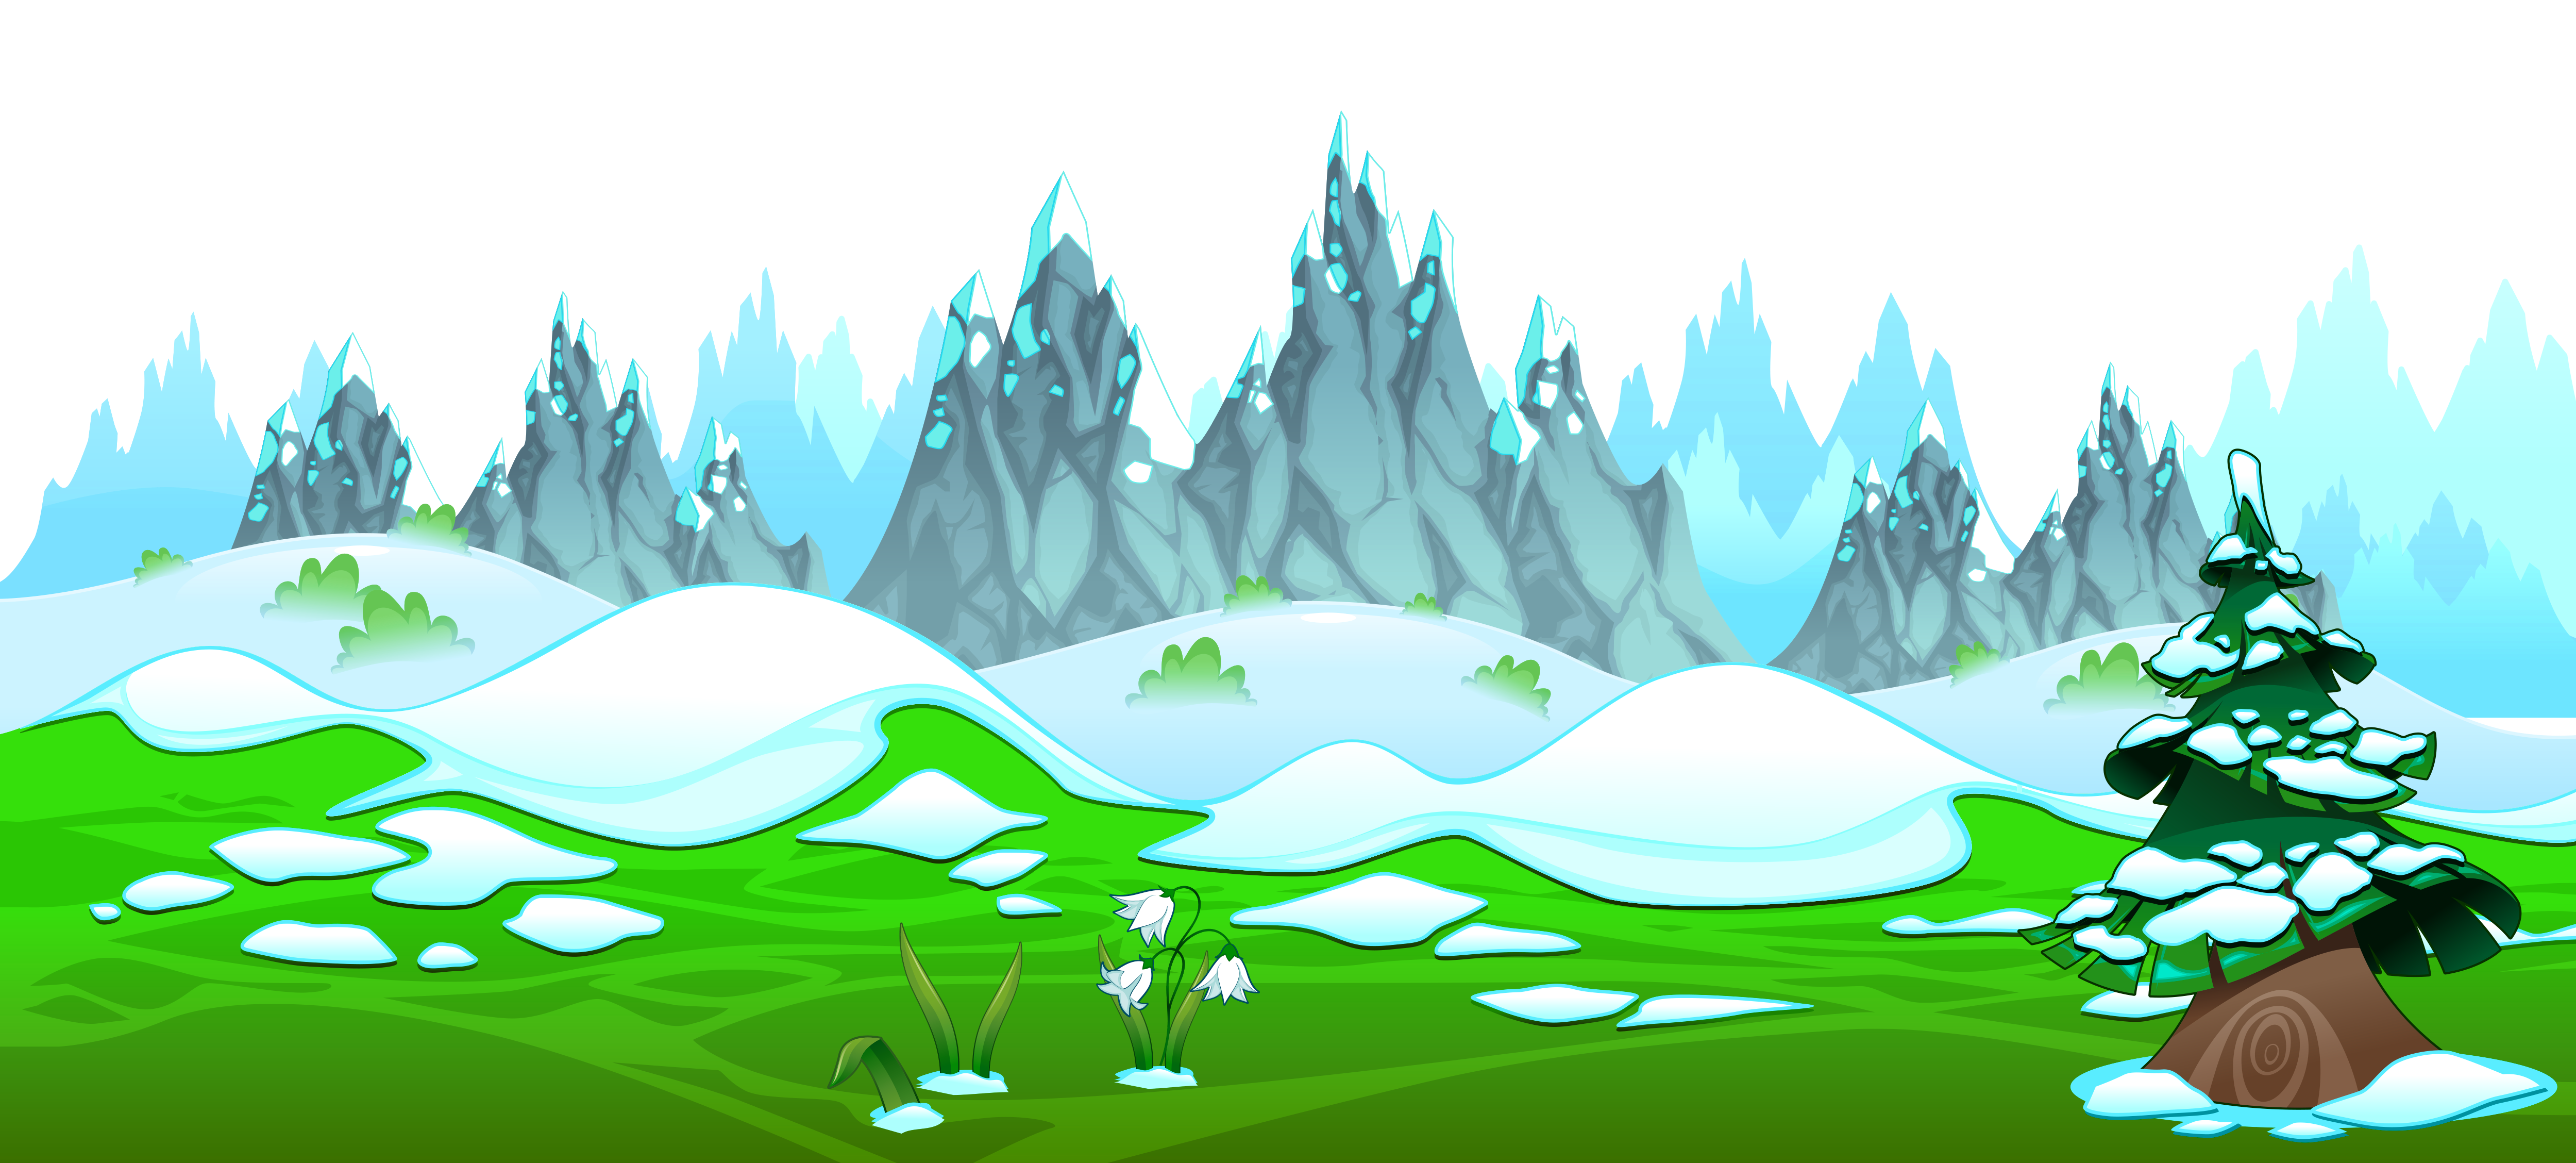 Early spring with icy mountains ground clipart - WikiClipArt